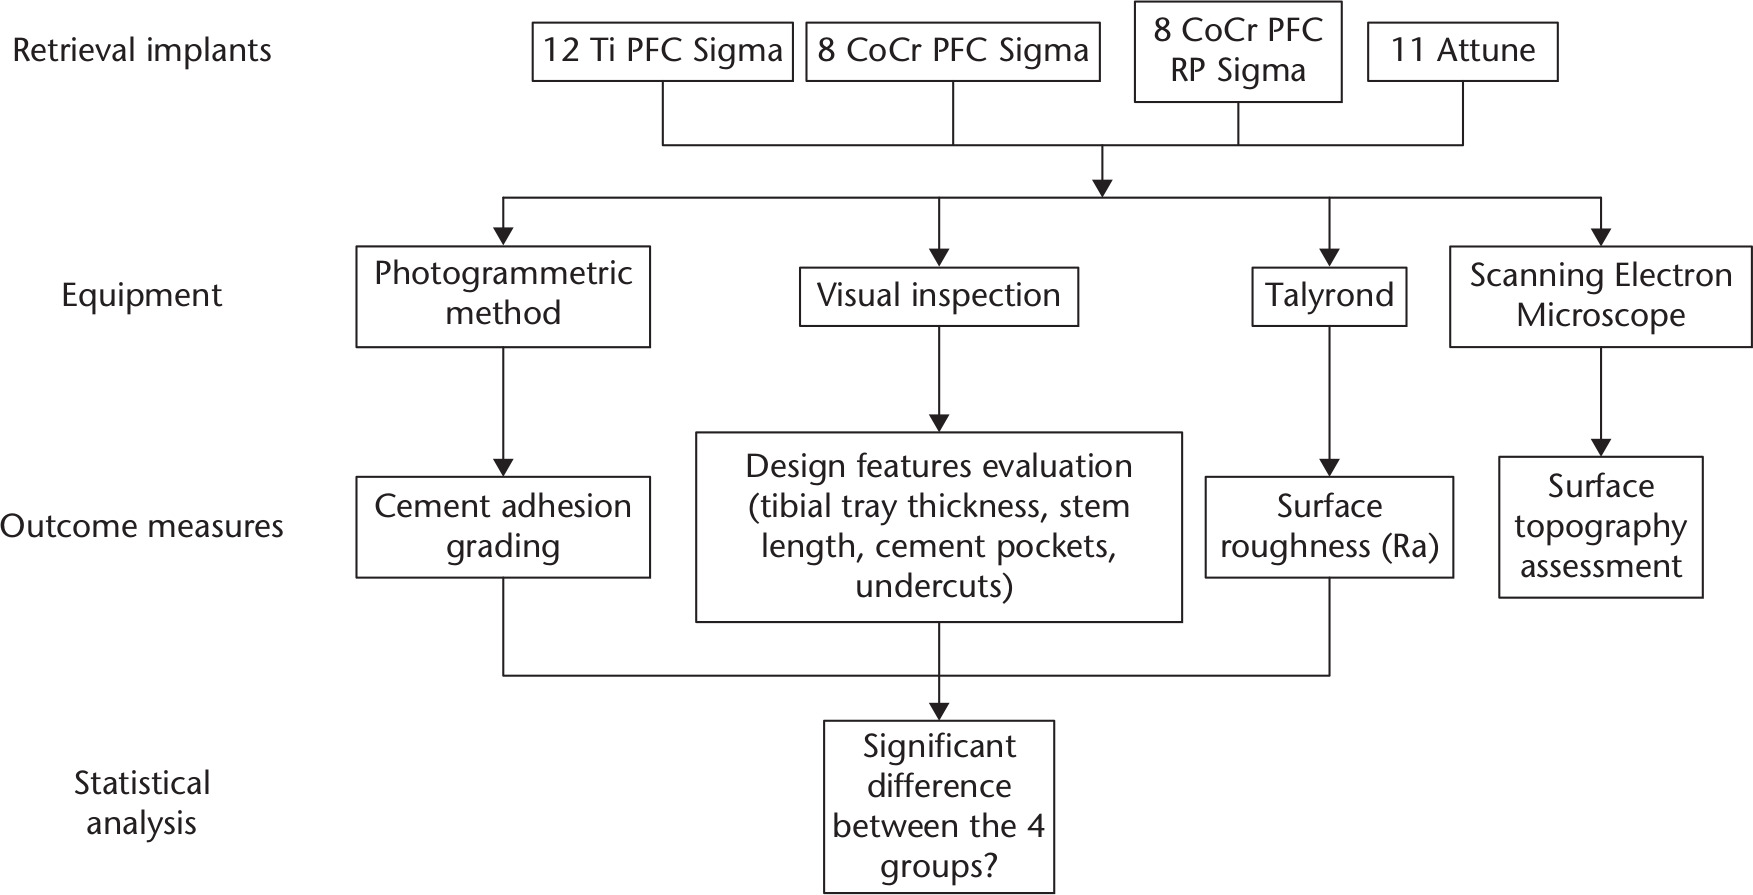 Fig. 1 
          Flowchart showing the methods used and outcome measures assessed in the four different tibial trays investigated. Ti, titanium; CoCr, cobalt-chromium; RP, rotating platform.
        